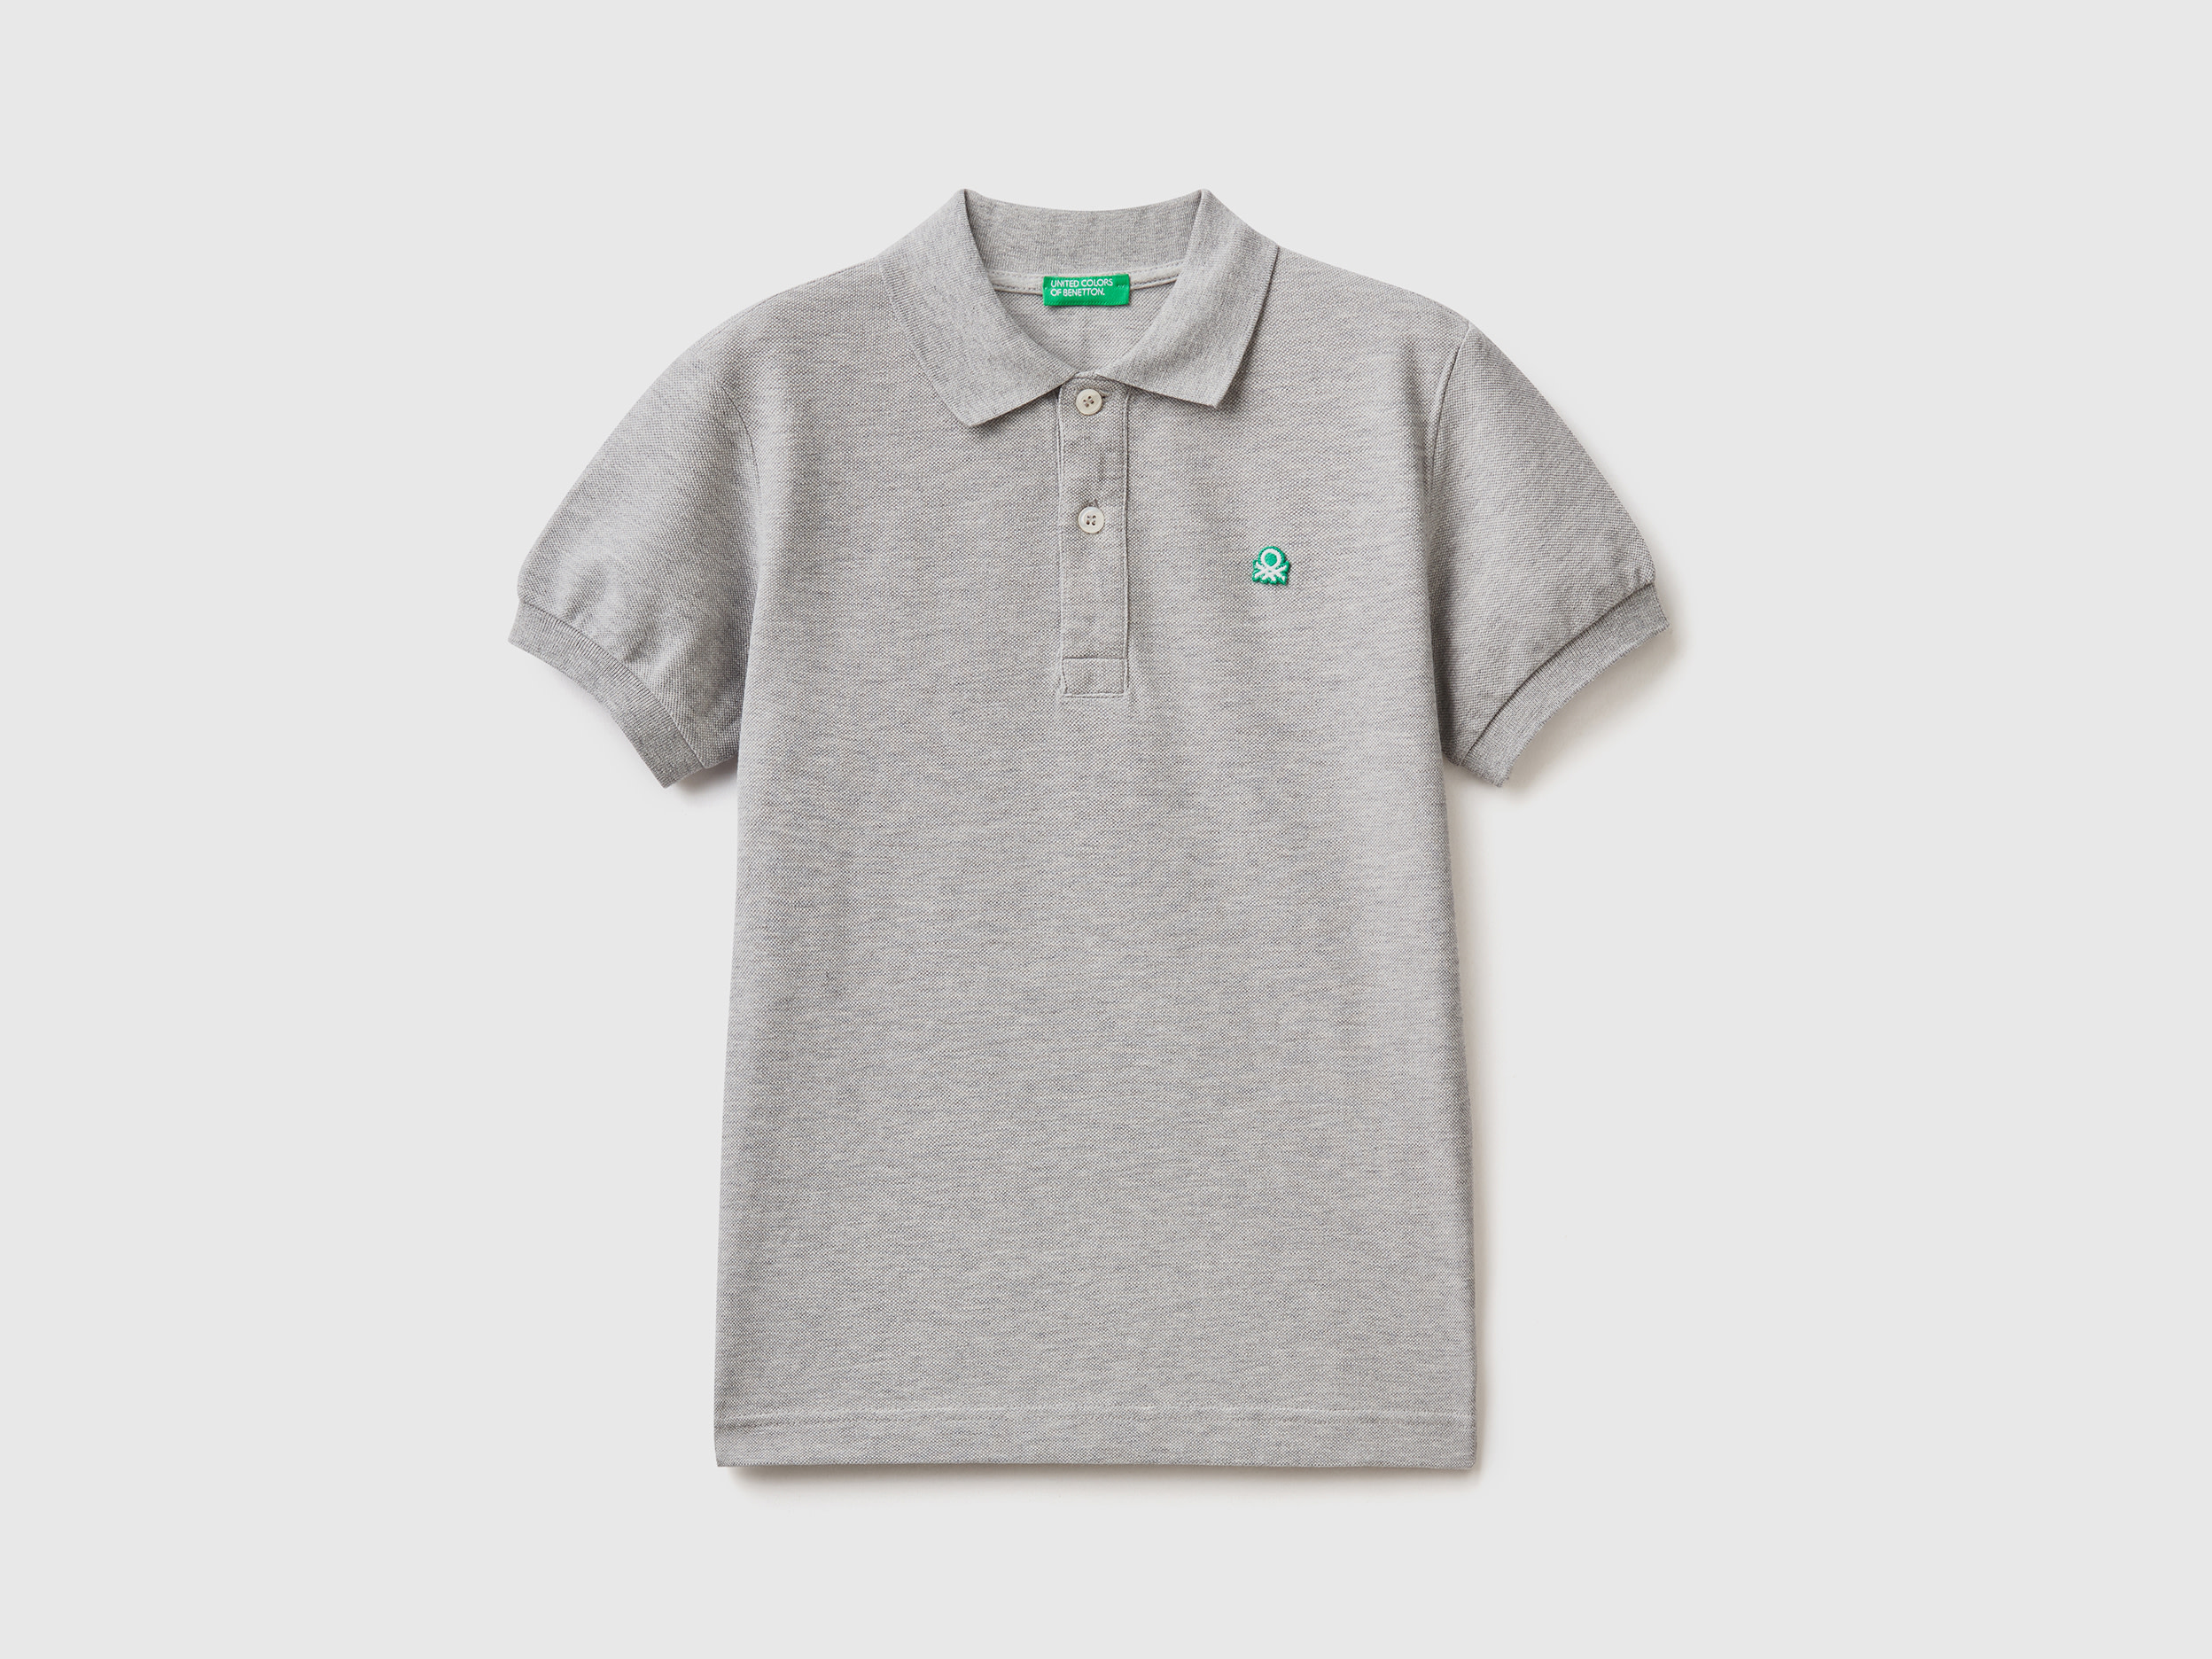 Image of Benetton, Slim Fit Polo In 100% Organic Cotton, size 2XL, Light Gray, Kids